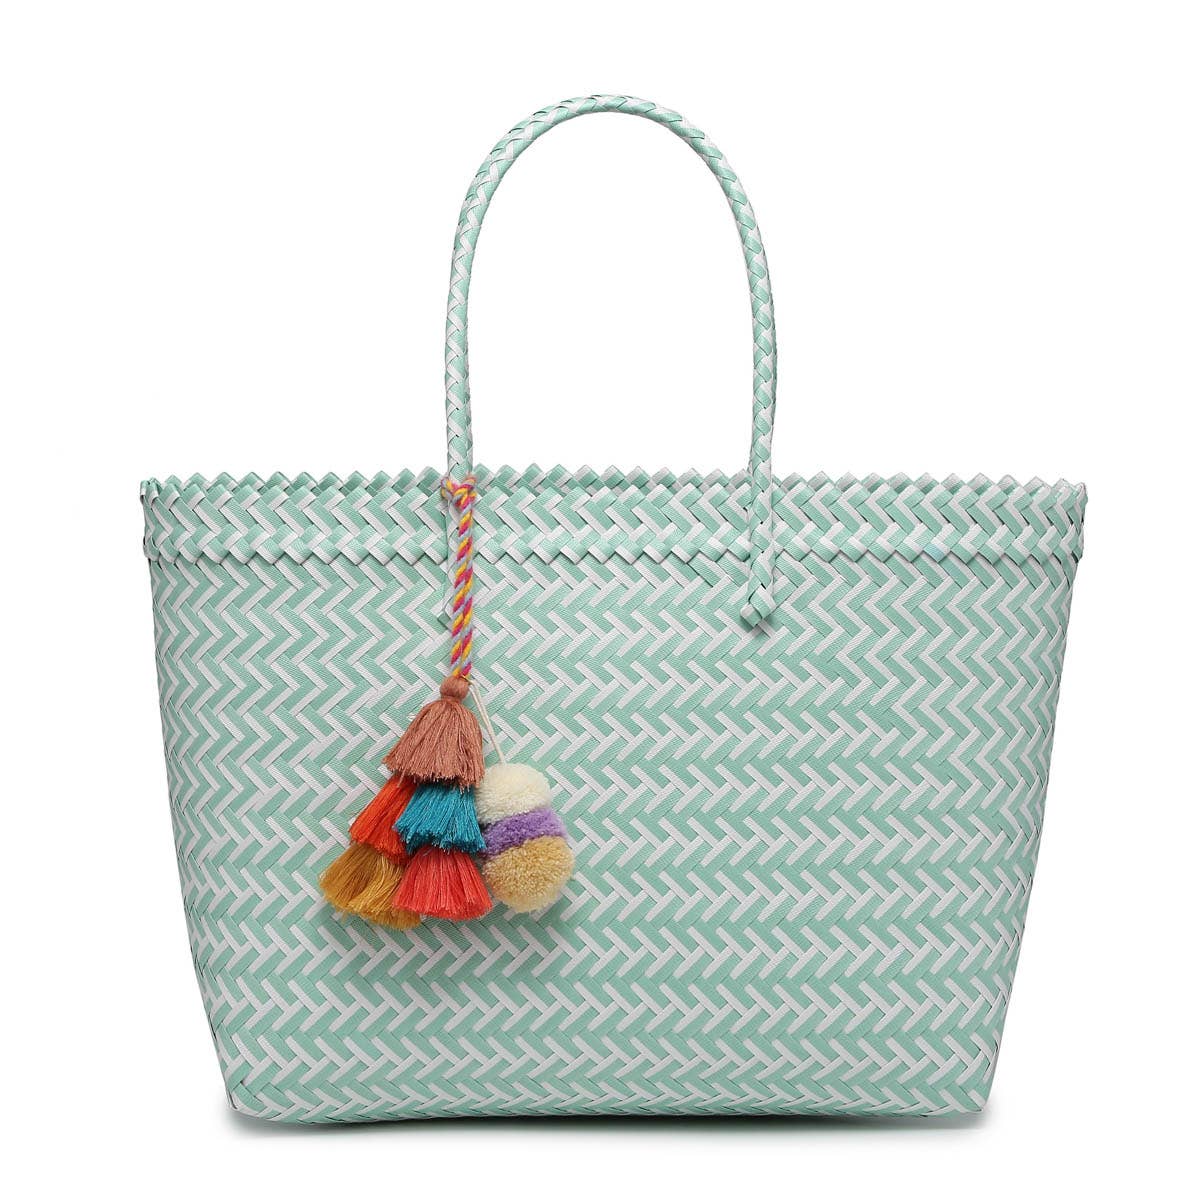 Shelby Large Handwoven Tote w/ Pom-Poms Green